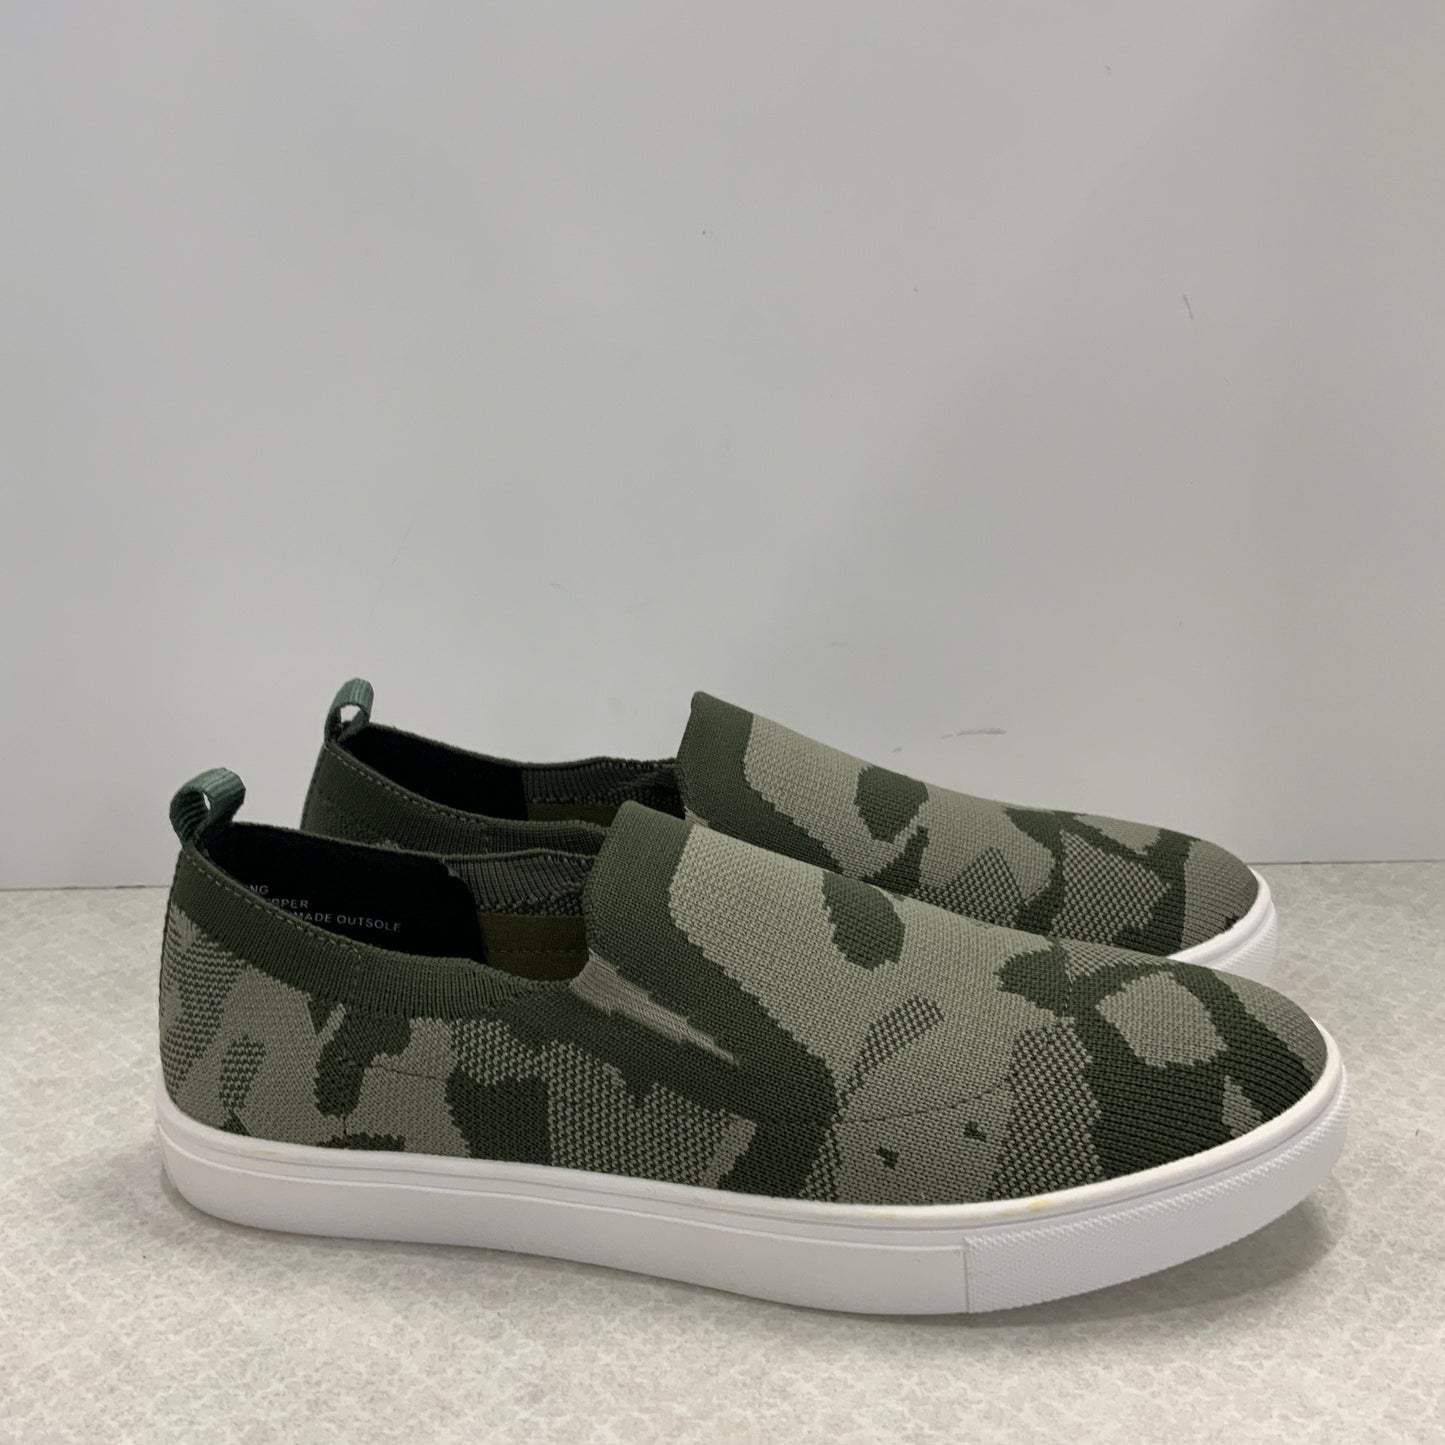 Camouflage Print Shoes Sneakers Jelly Pop, Size 9